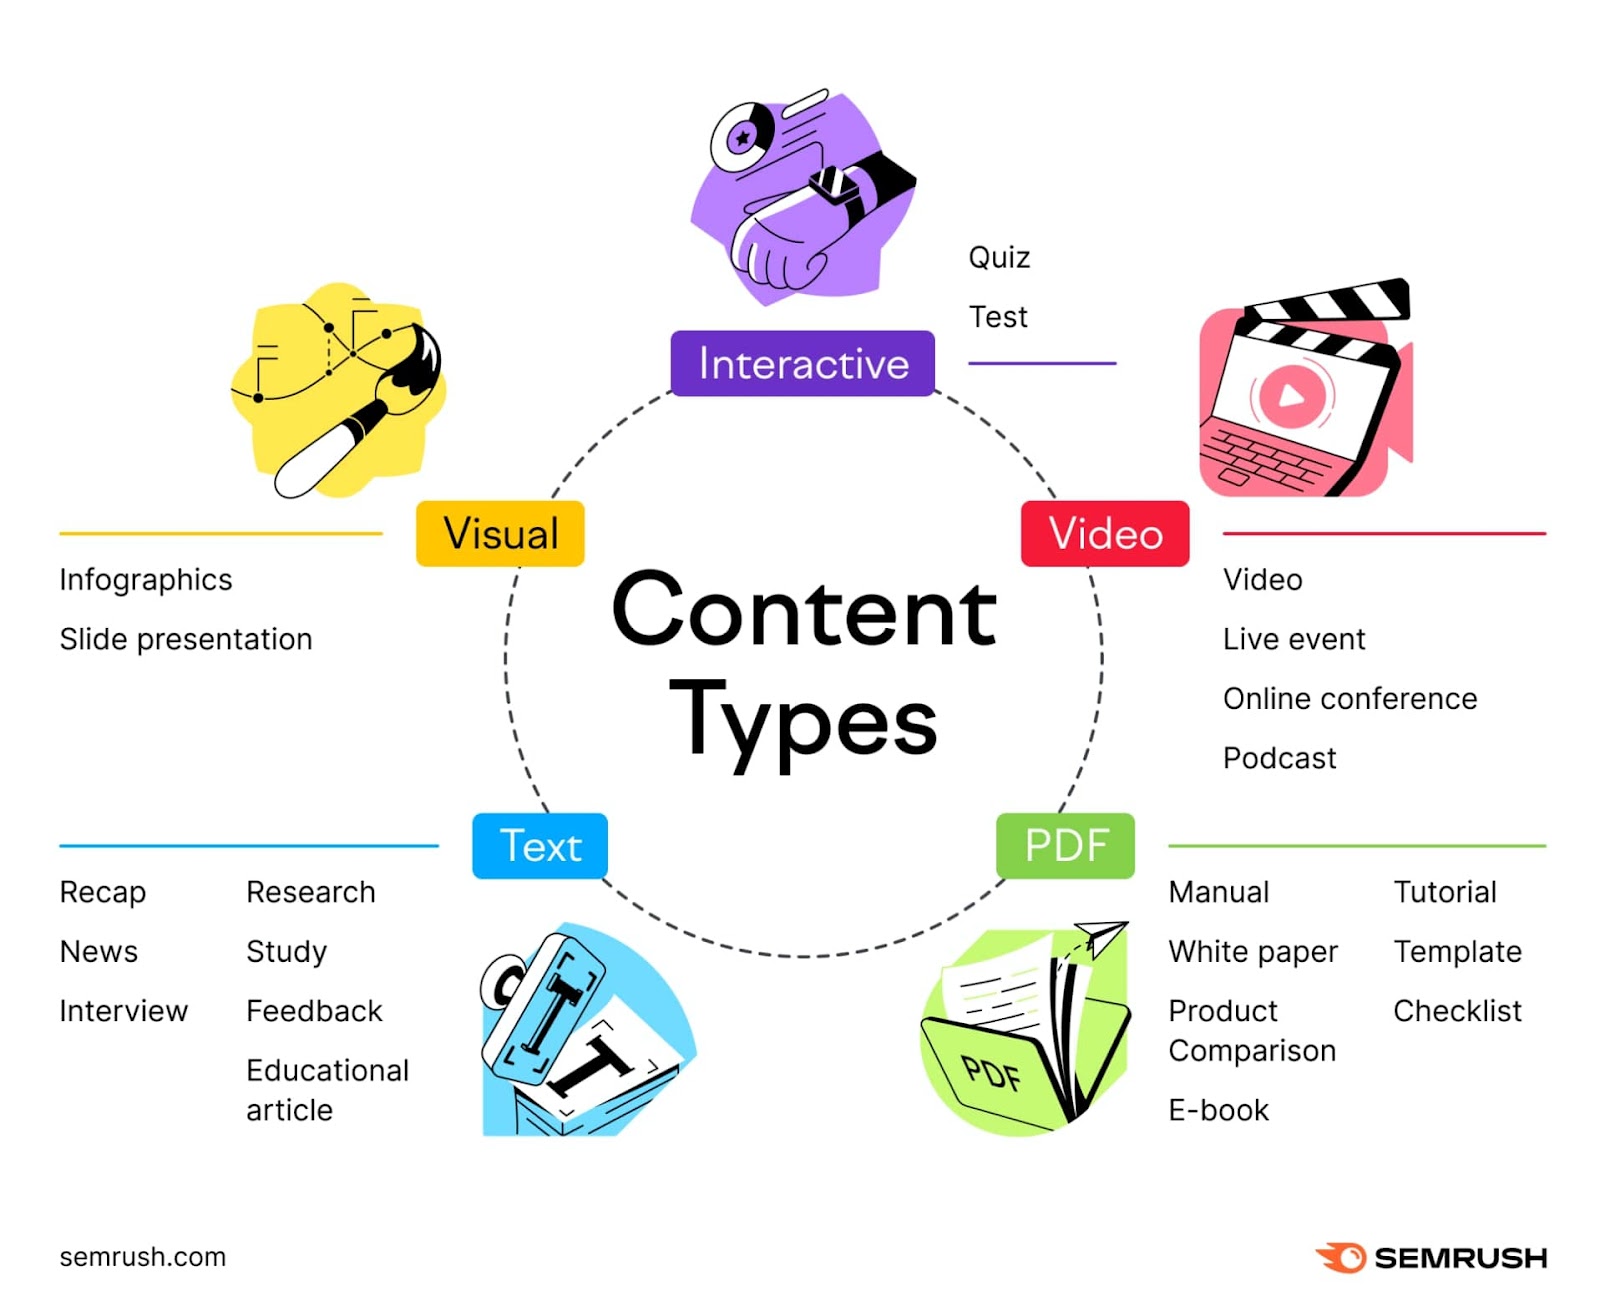 An infographic listing different content types